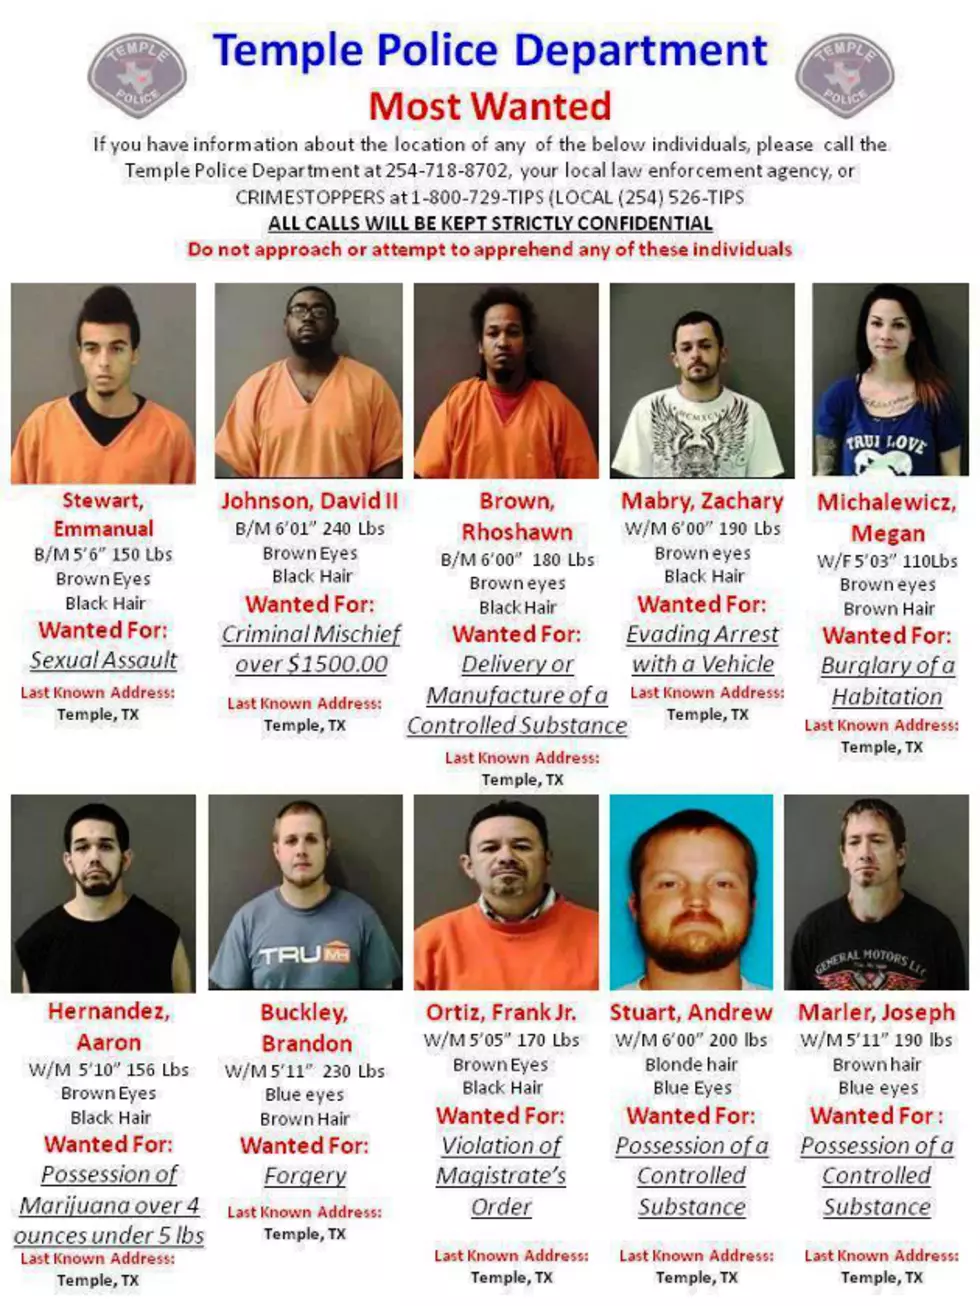 Temple Police Department Updates Top 10 Most Wanted List